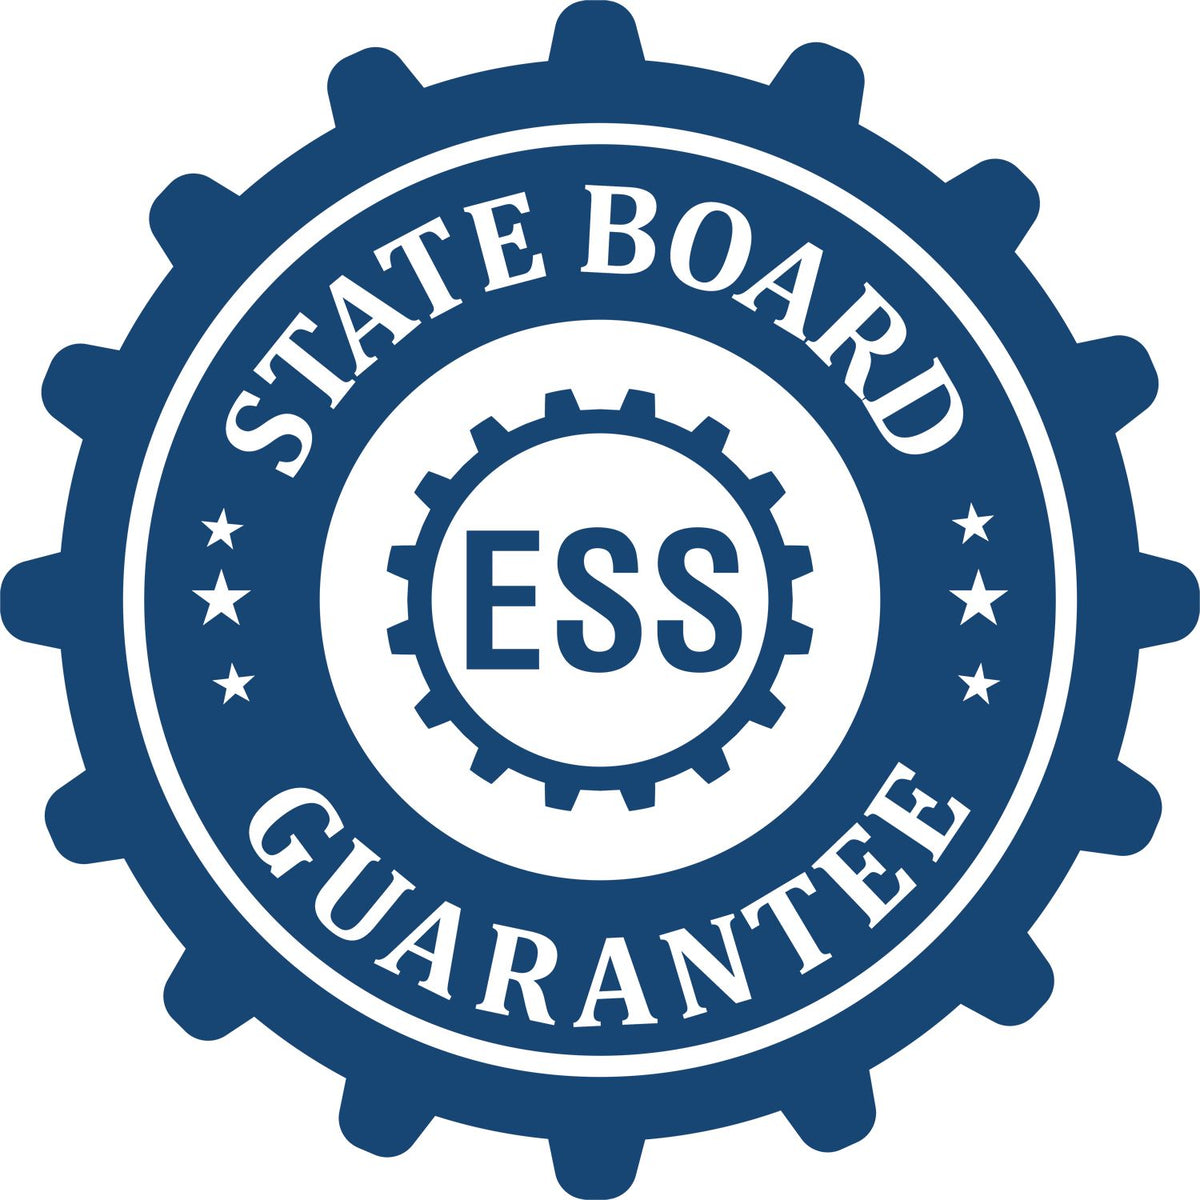 An emblem in a gear shape illustrating a state board guarantee for the Hybrid Georgia Architect Seal